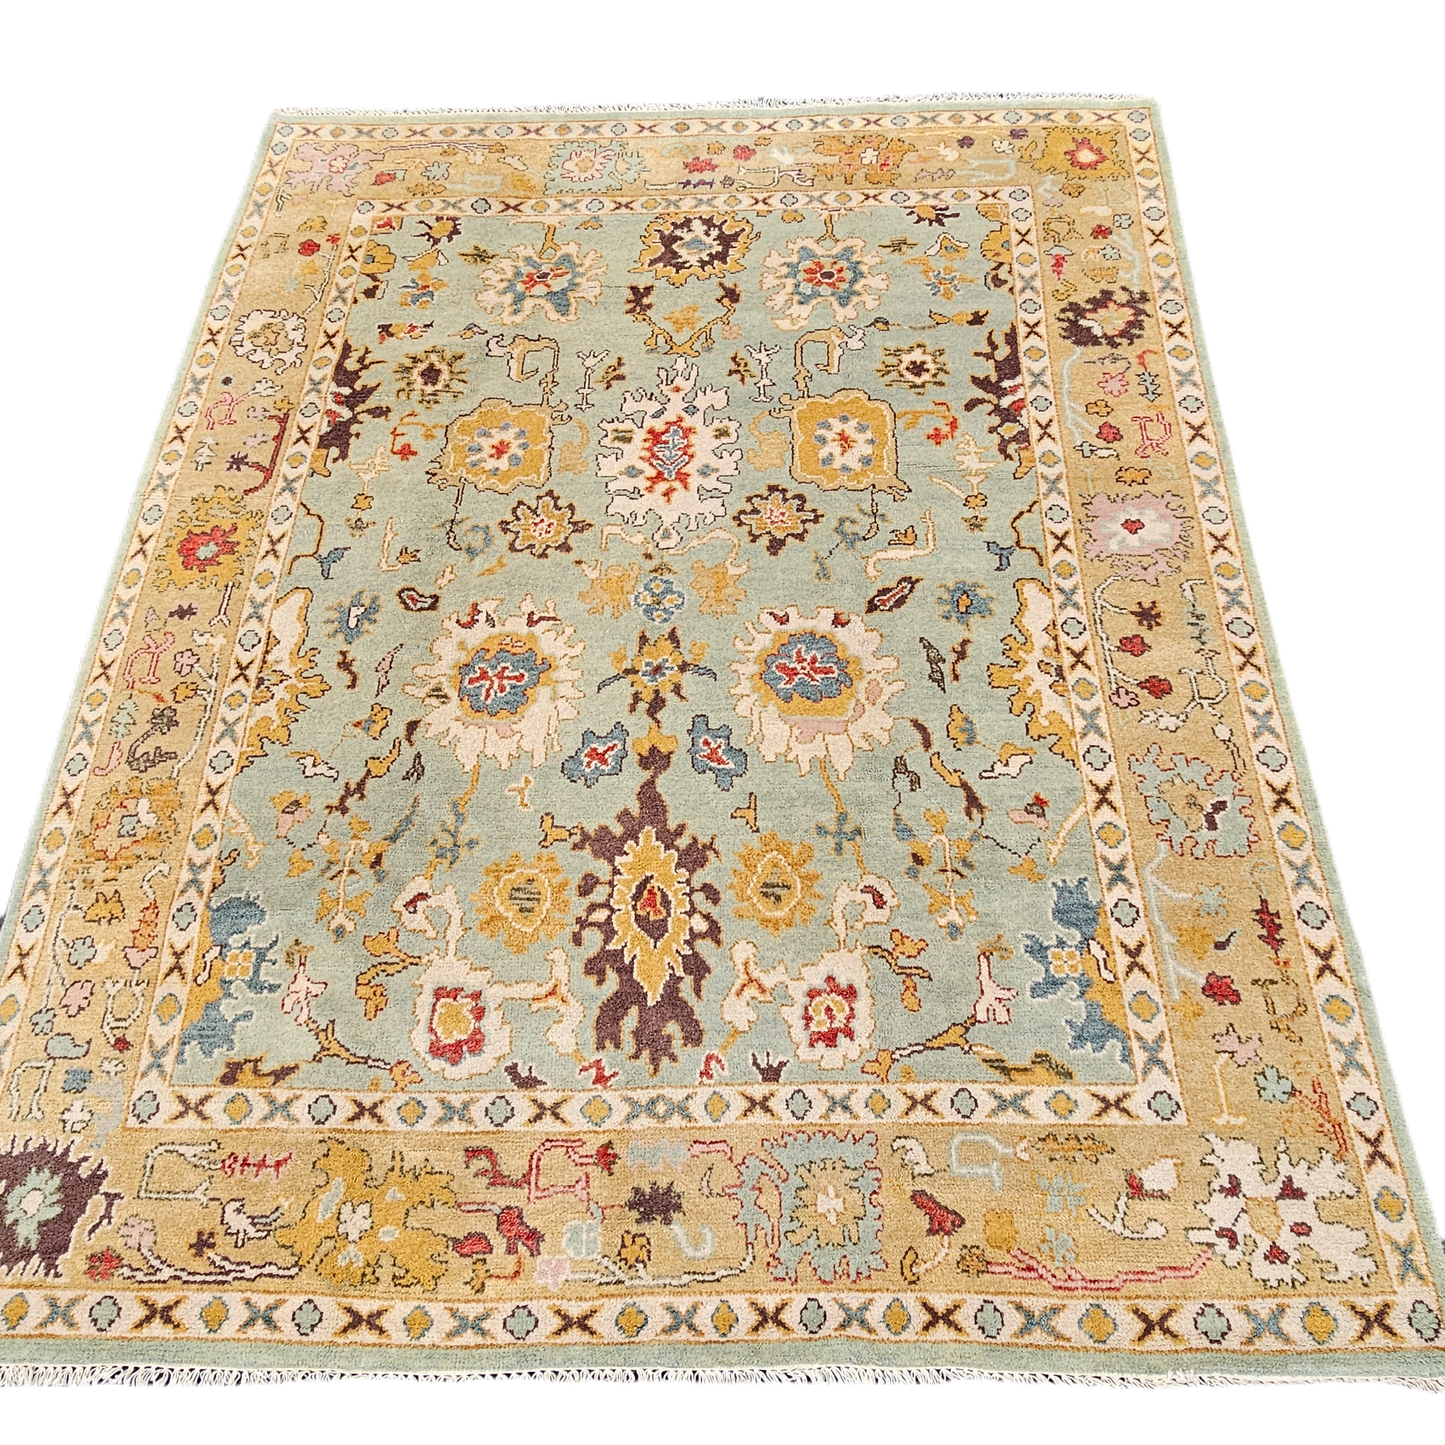 Brand New 100% Wool Turkish Hand Knotted Multi Colored Rug ~ 8' 3" x 10' 3"